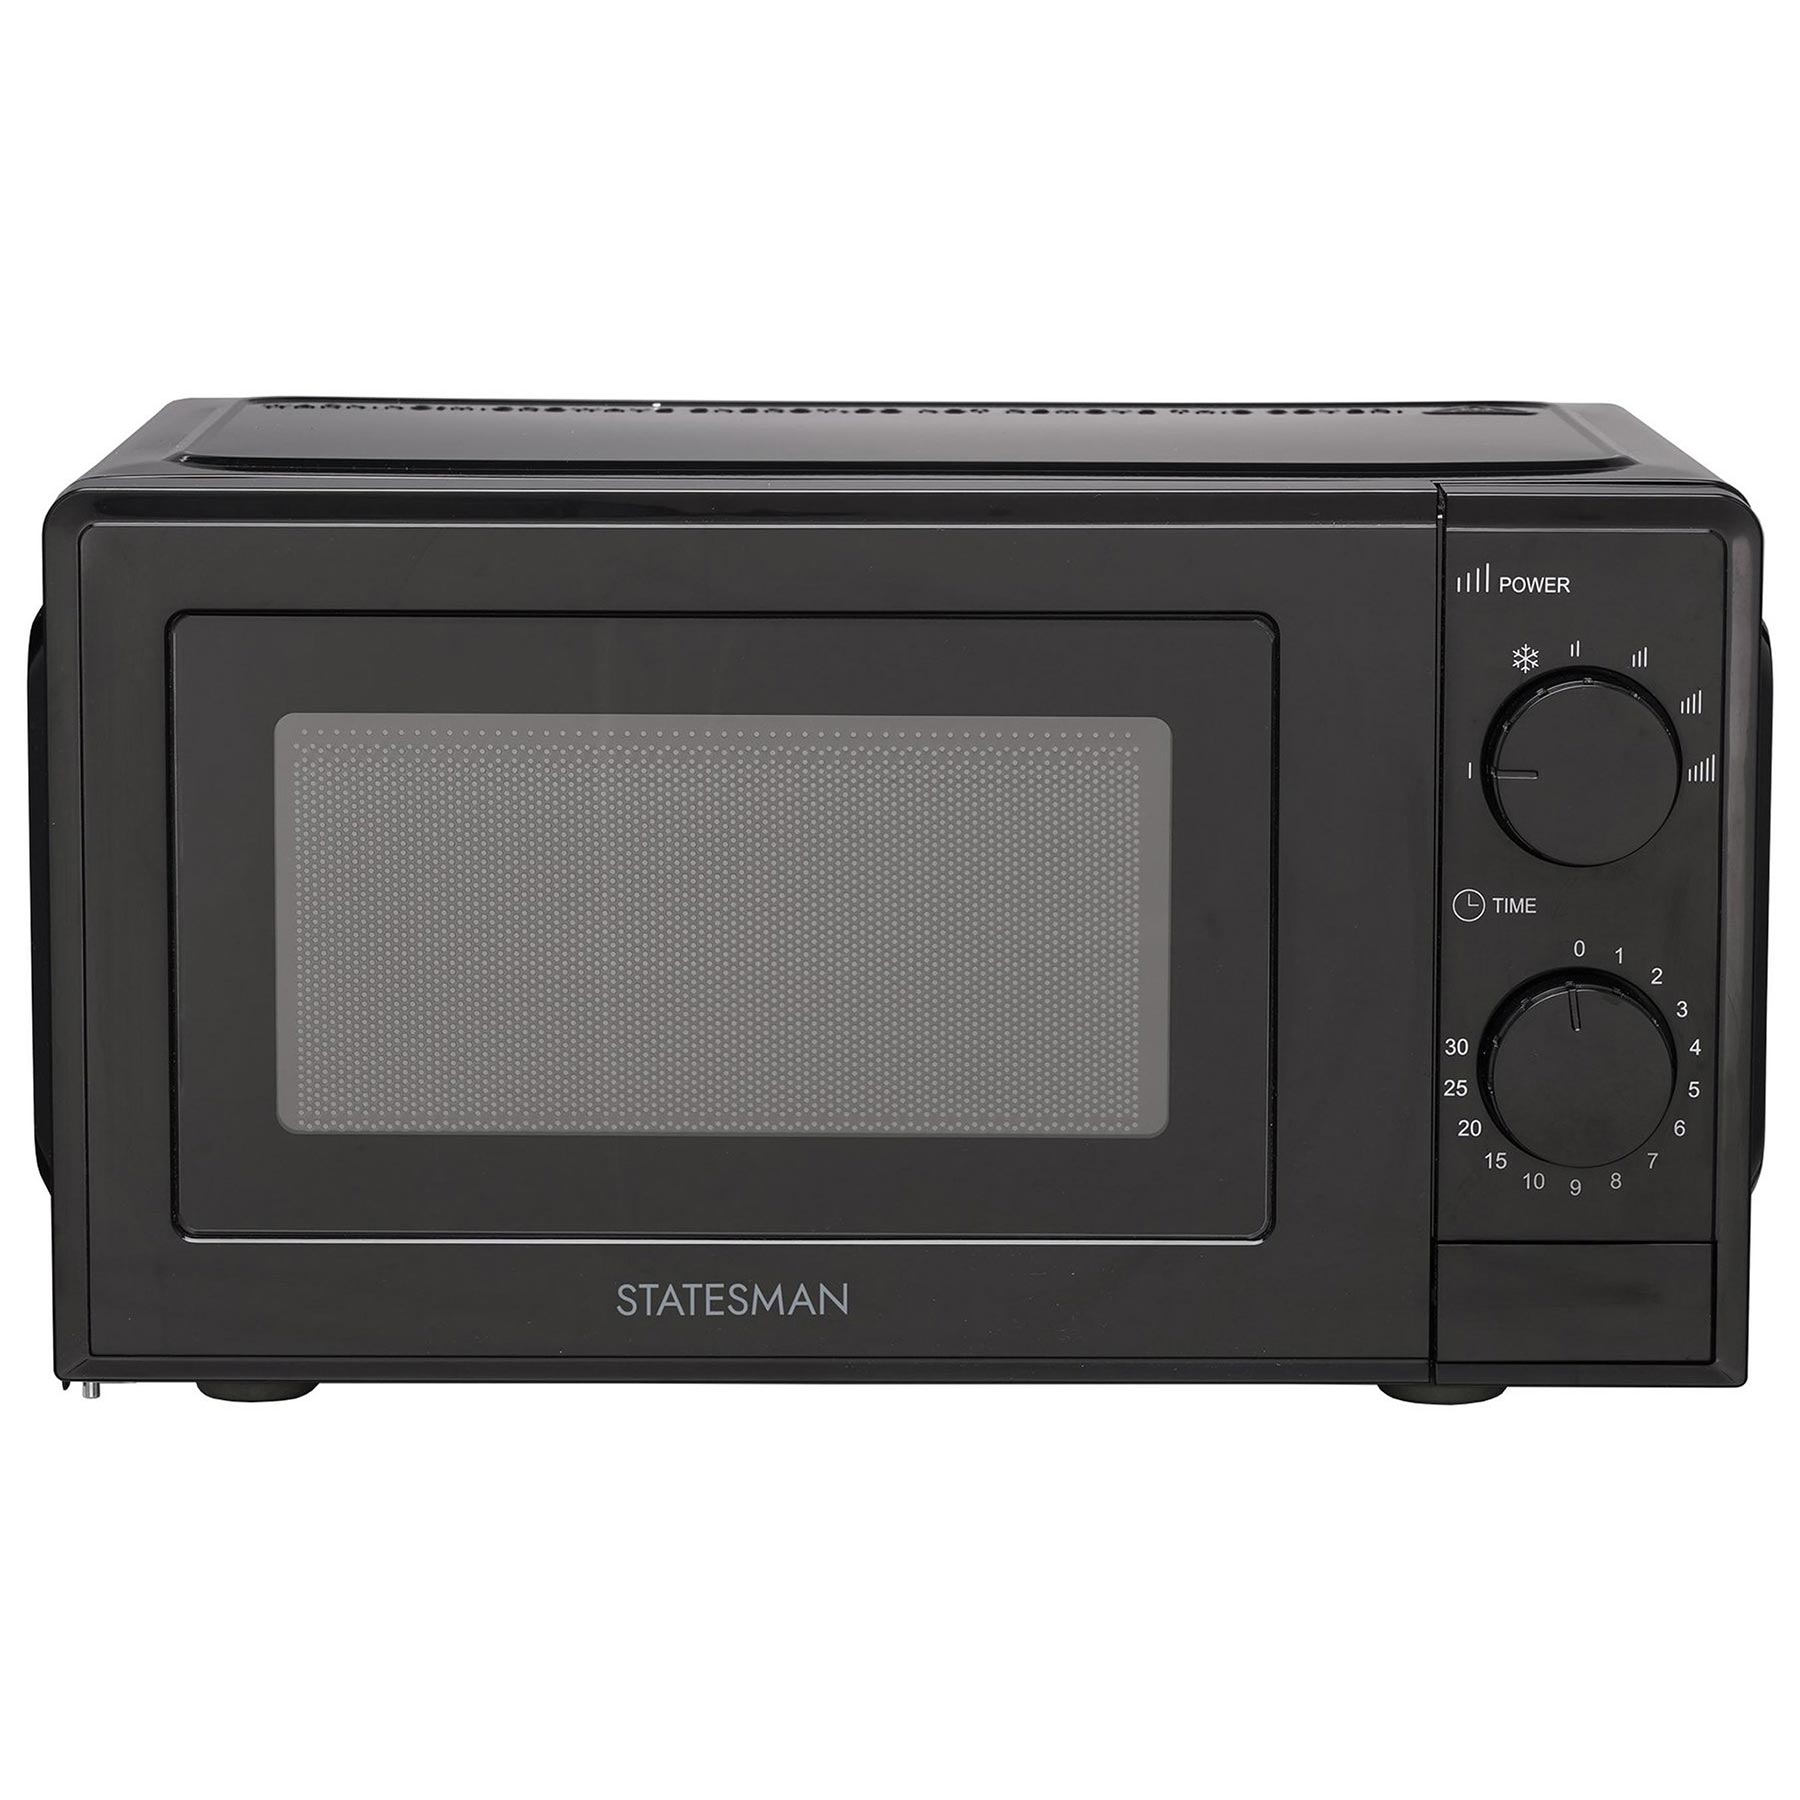 Photos - Microwave Statesman SKMS0720MPB  Oven in Black 20L 700W Manual Control